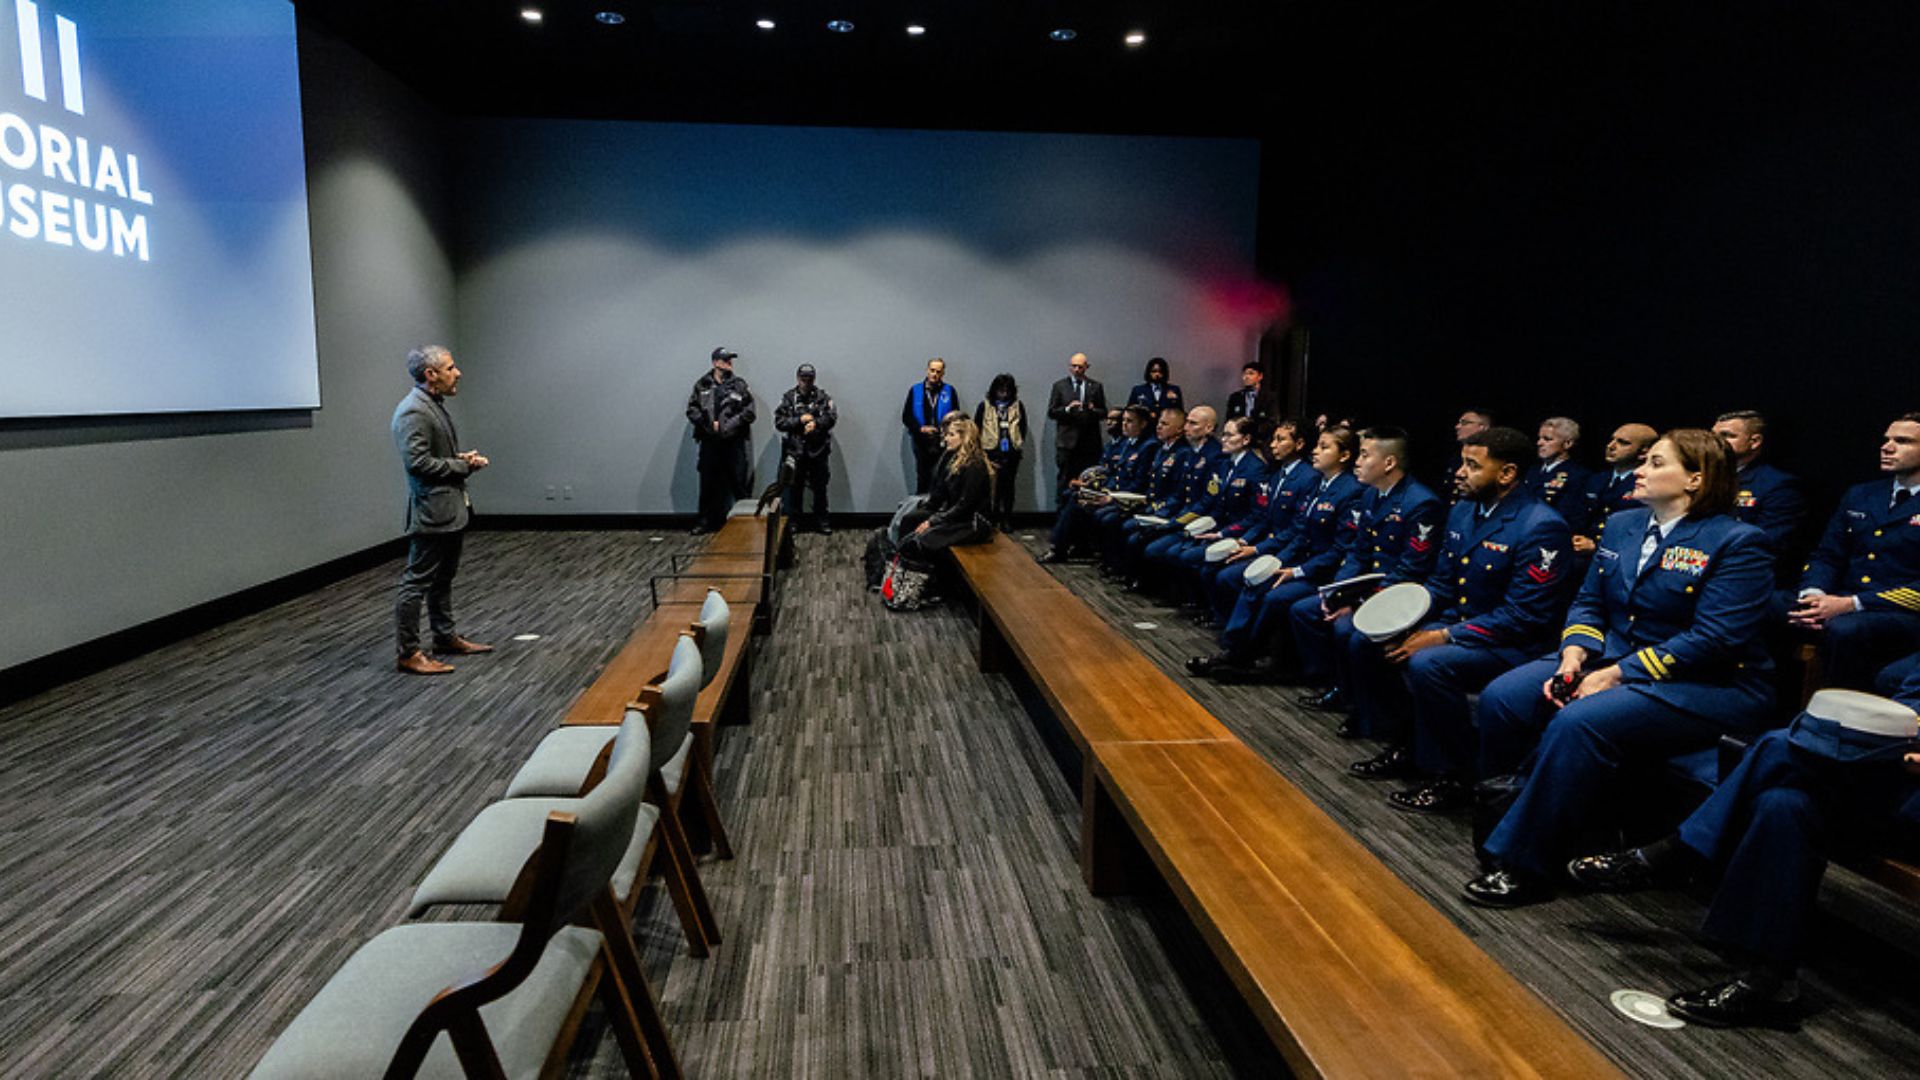  A group of uniformed Coast Guard members in the auditorium, listening to a staff member speak in front of a movie screen